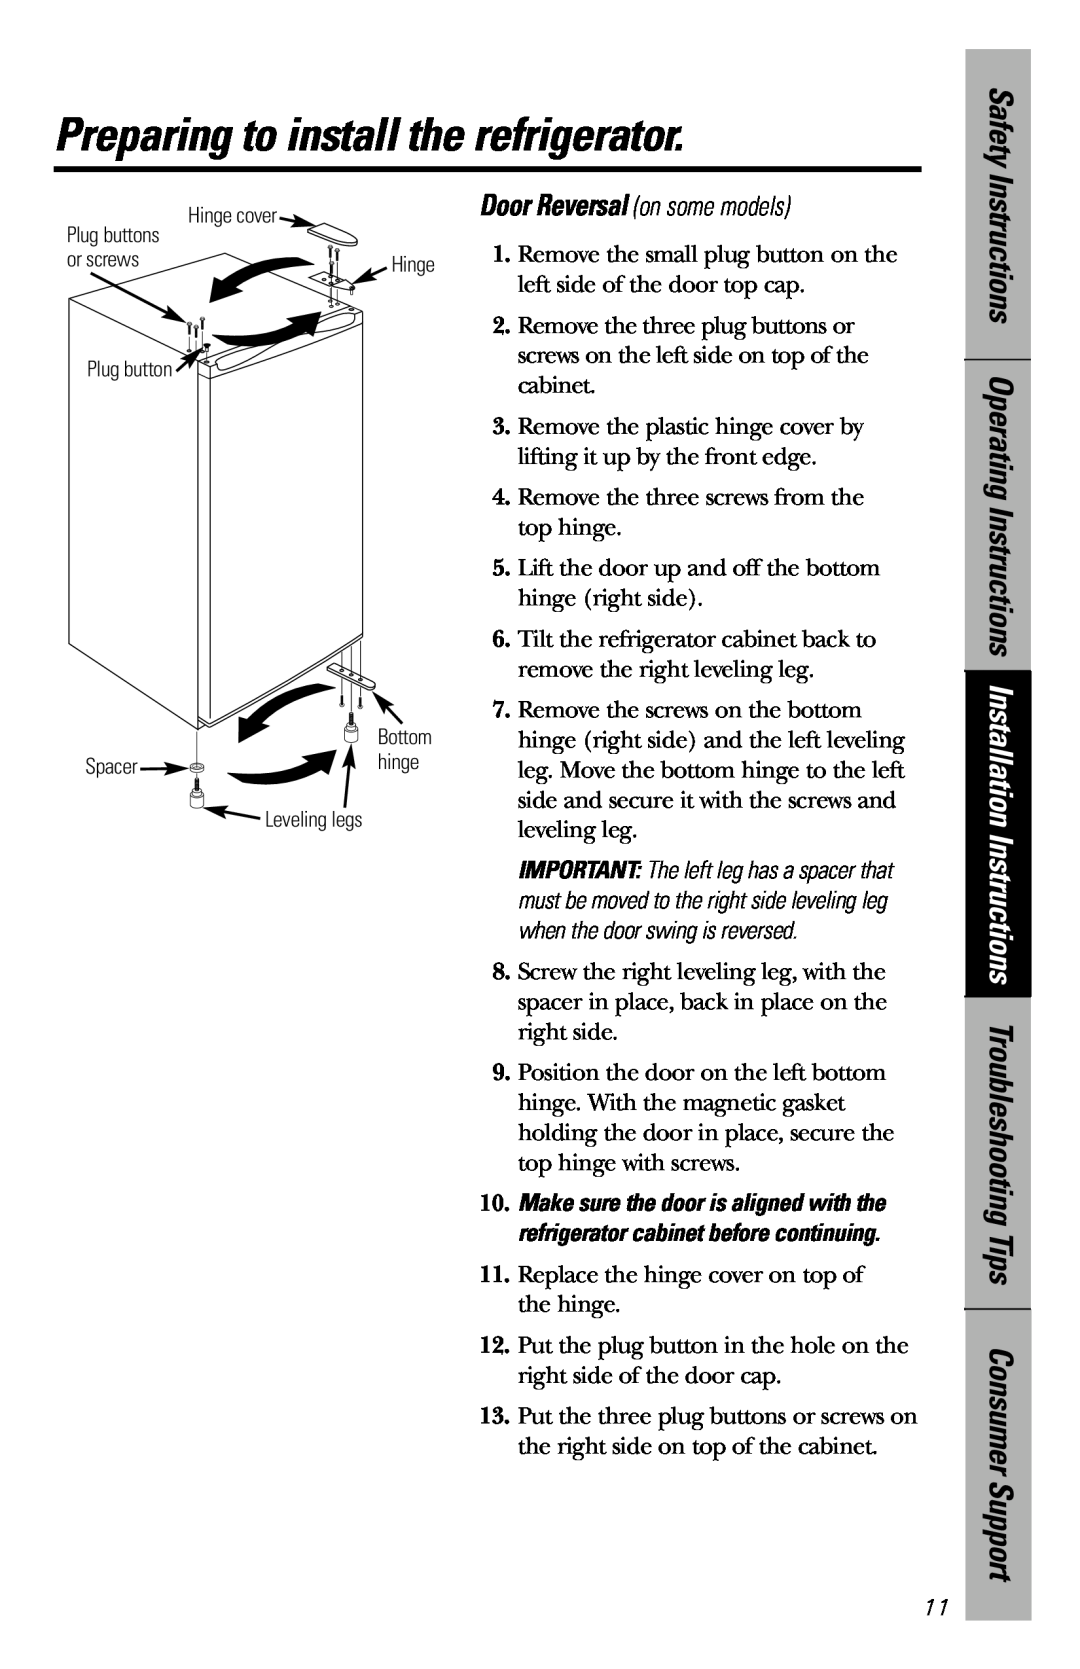 GE 49-60327 owner manual Safety, Door Reversal on some models, Consumer Support, Preparing to install the refrigerator 